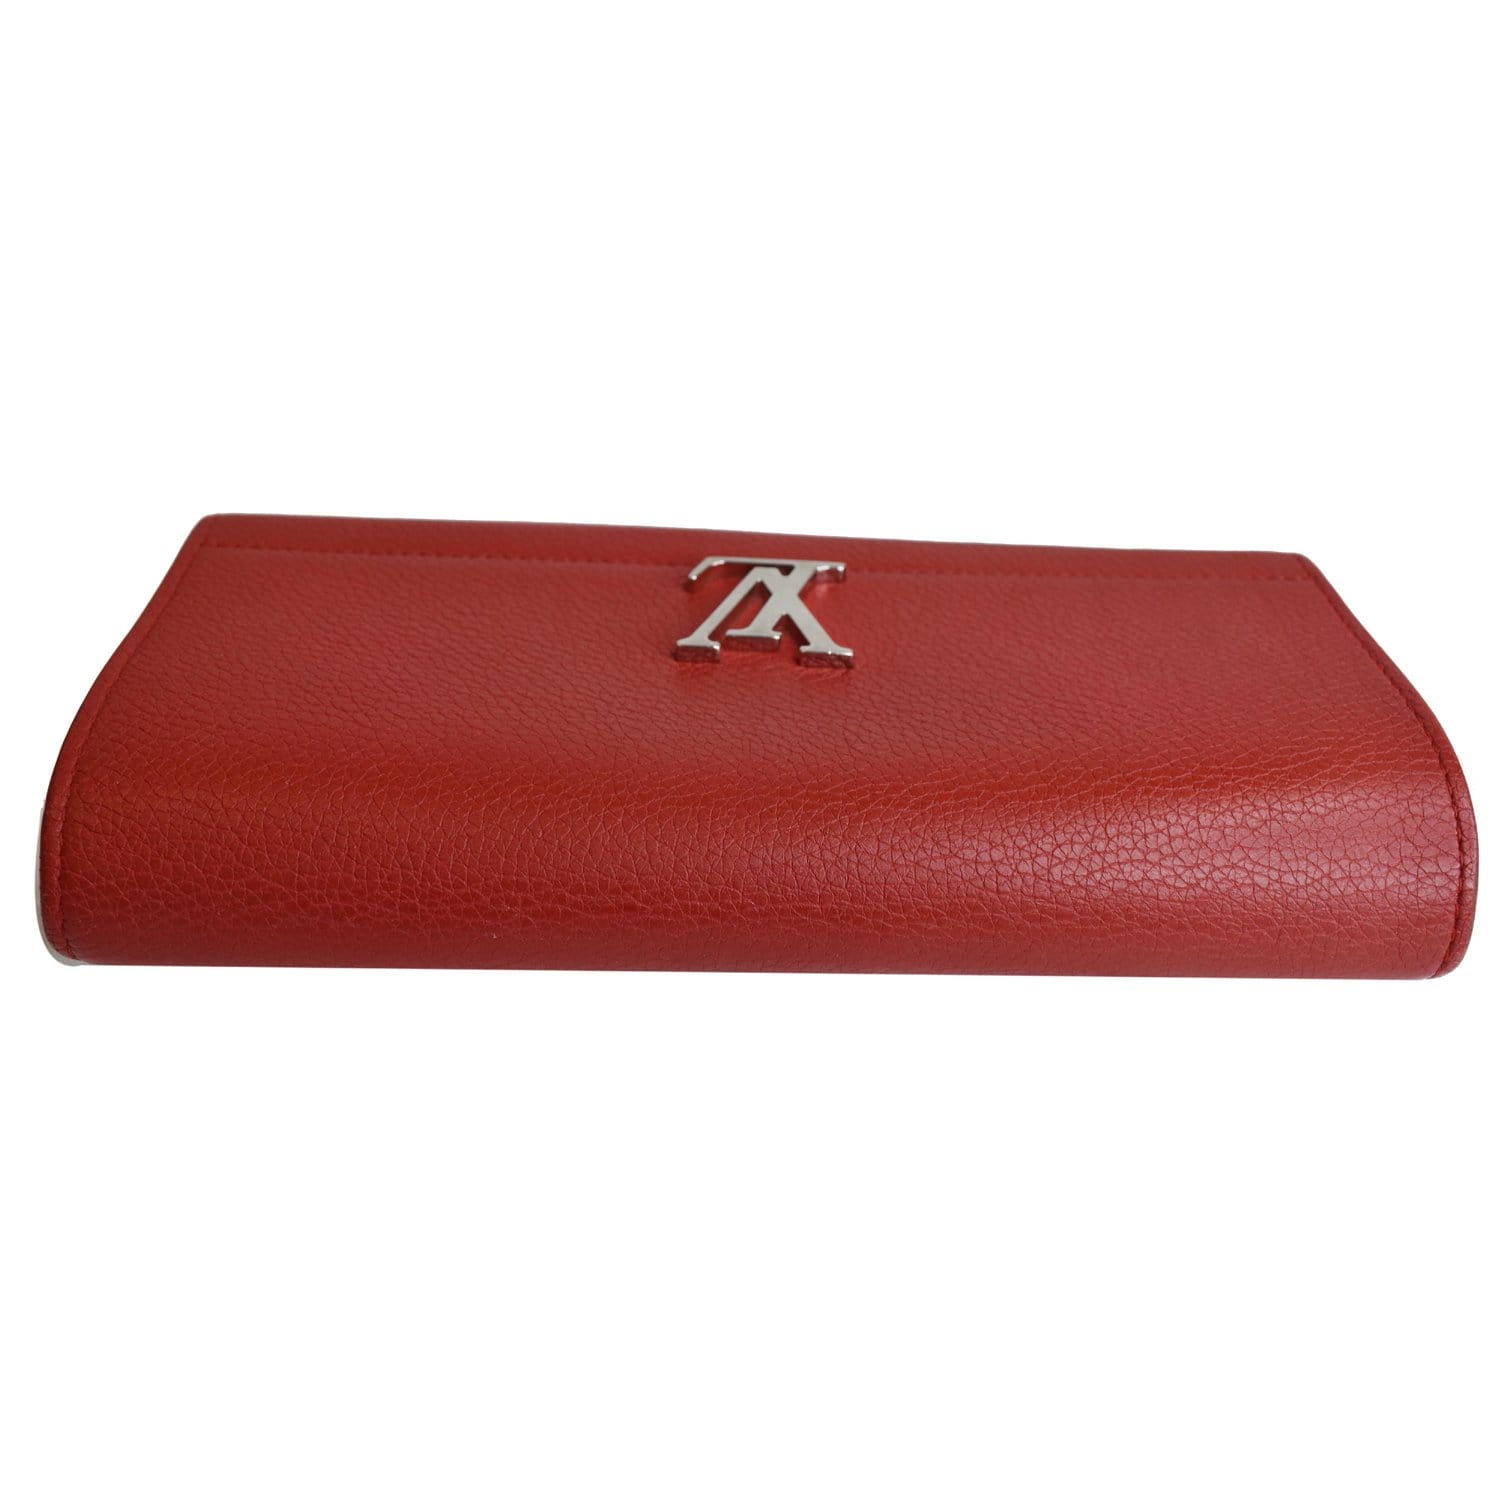 Louis Vuitton Leather Red Wallets For Women For Sale